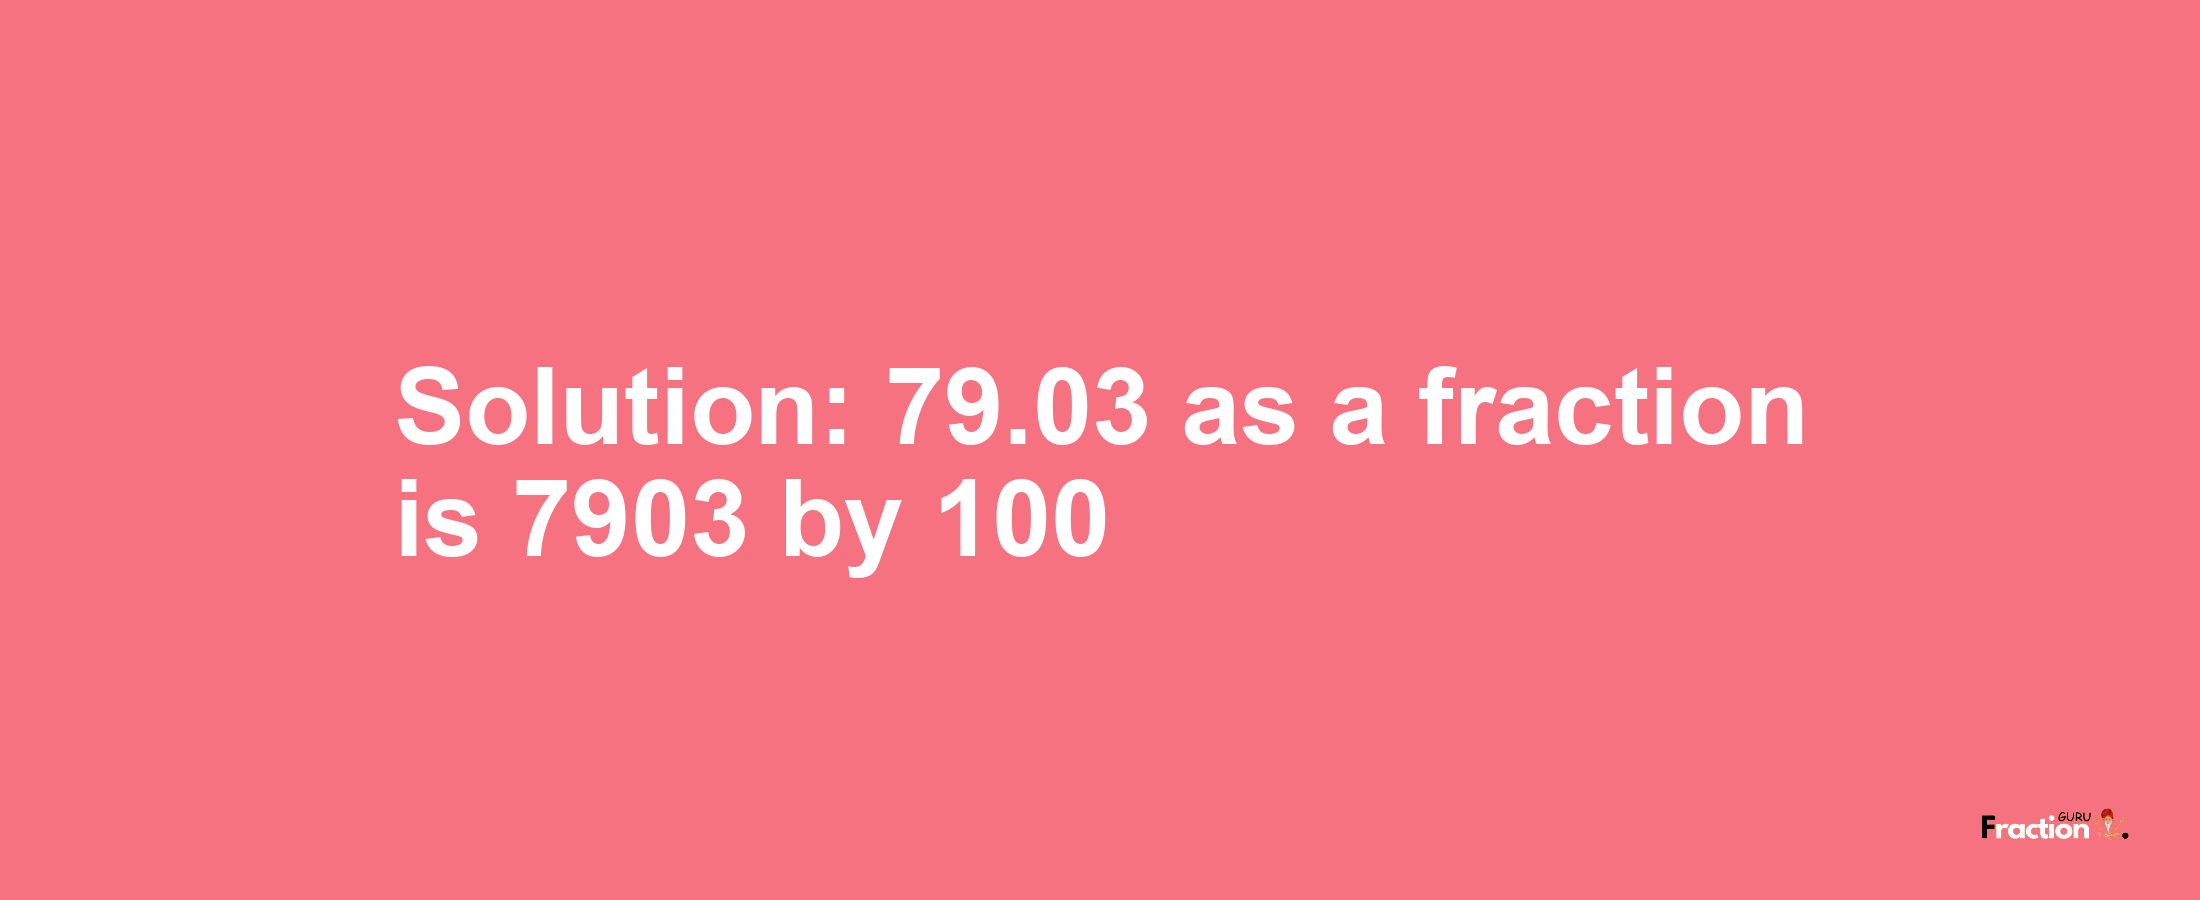 Solution:79.03 as a fraction is 7903/100